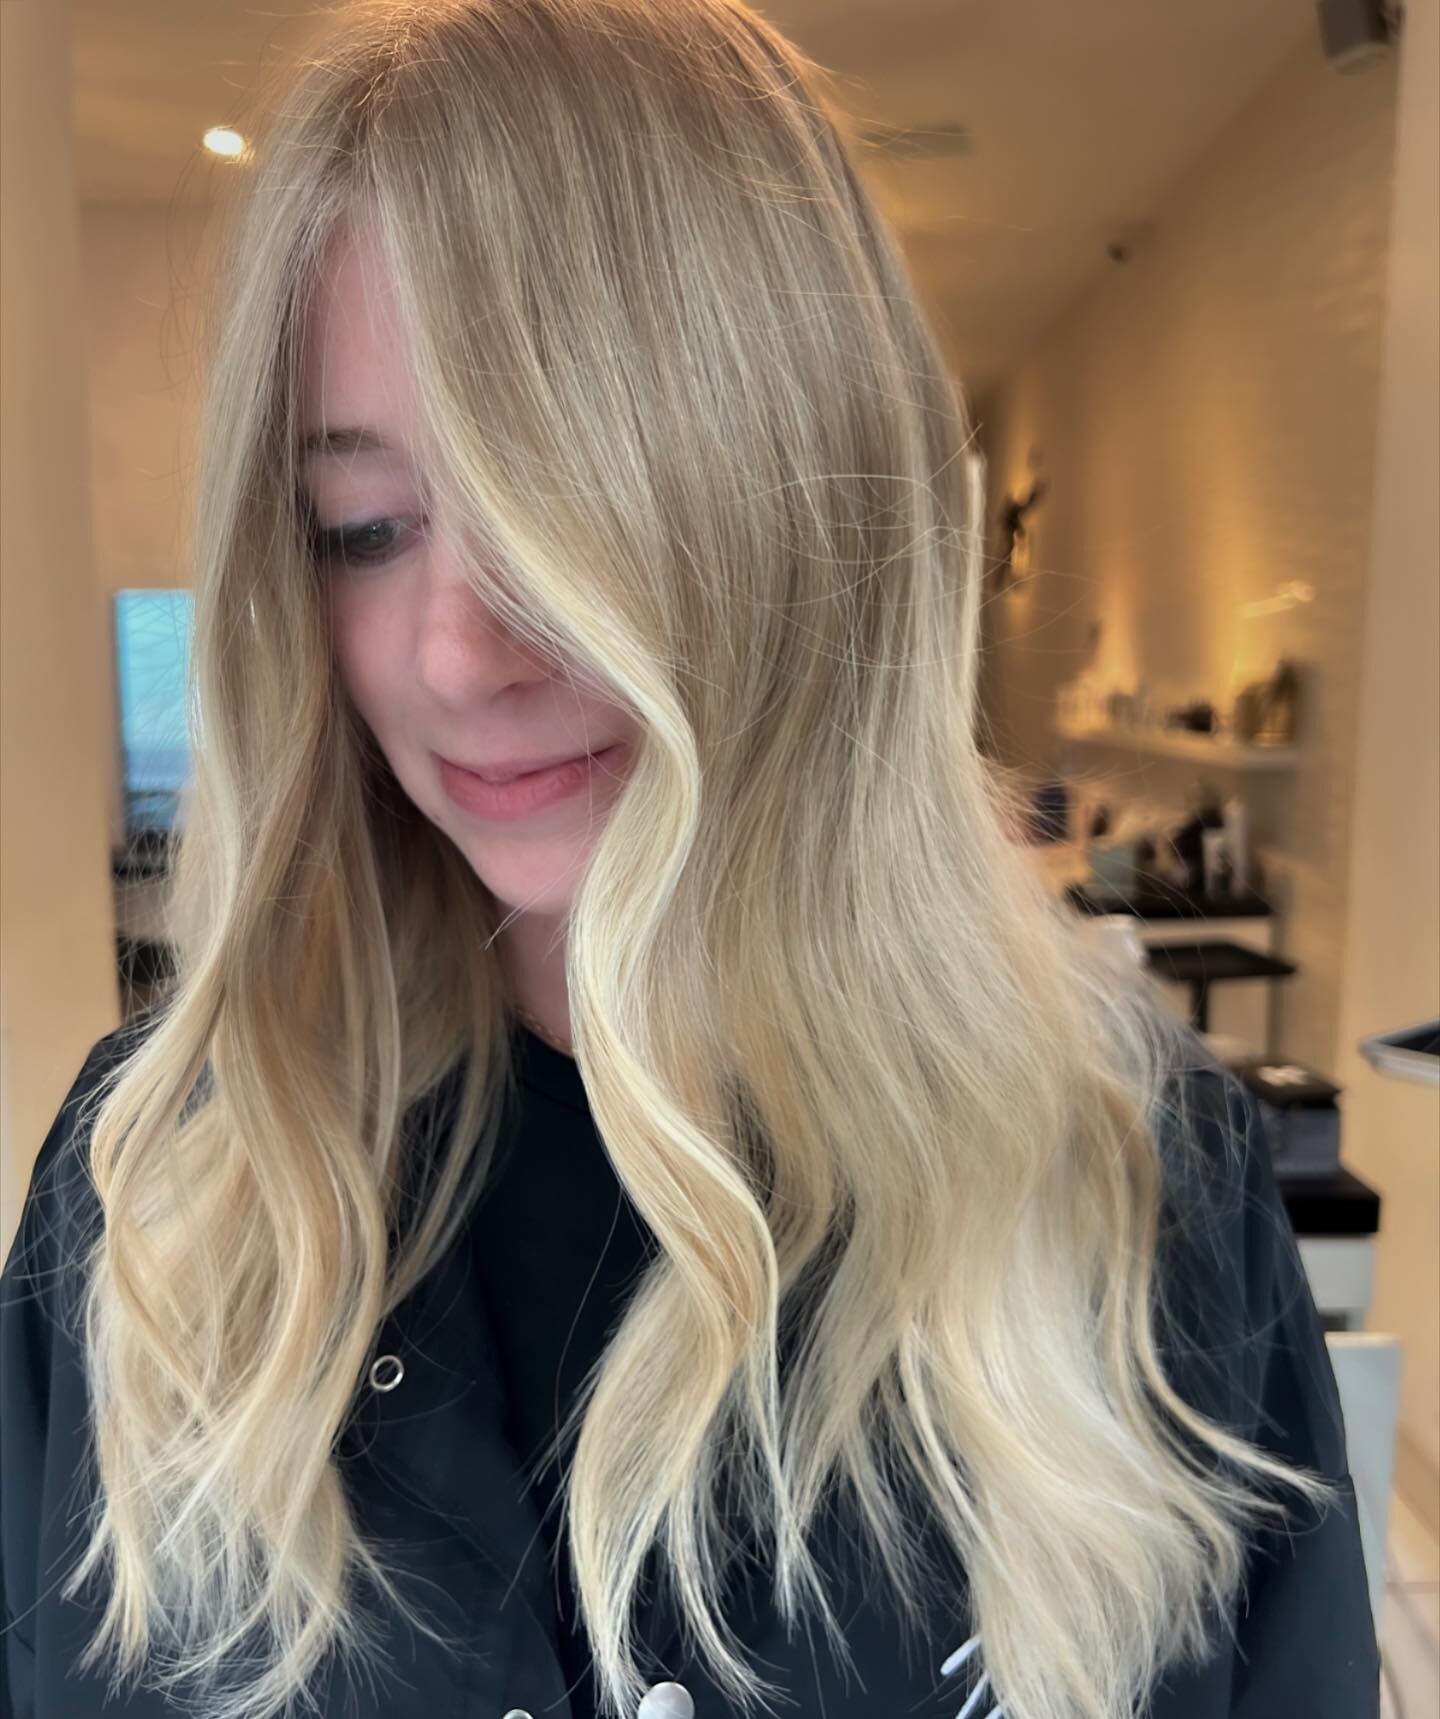 Framing The Face 💛
.
#mobawards_blonde2023 
#mobawards_faceframe2023 
.
Lifted using @lorealpro  platinum paste 
.
Styled using @t3micro 1.25 barrel
.
#chicagoblondespecialist #chicagohairstylist #chicagobalayage #chicagocolorist #livedinblonde #btc